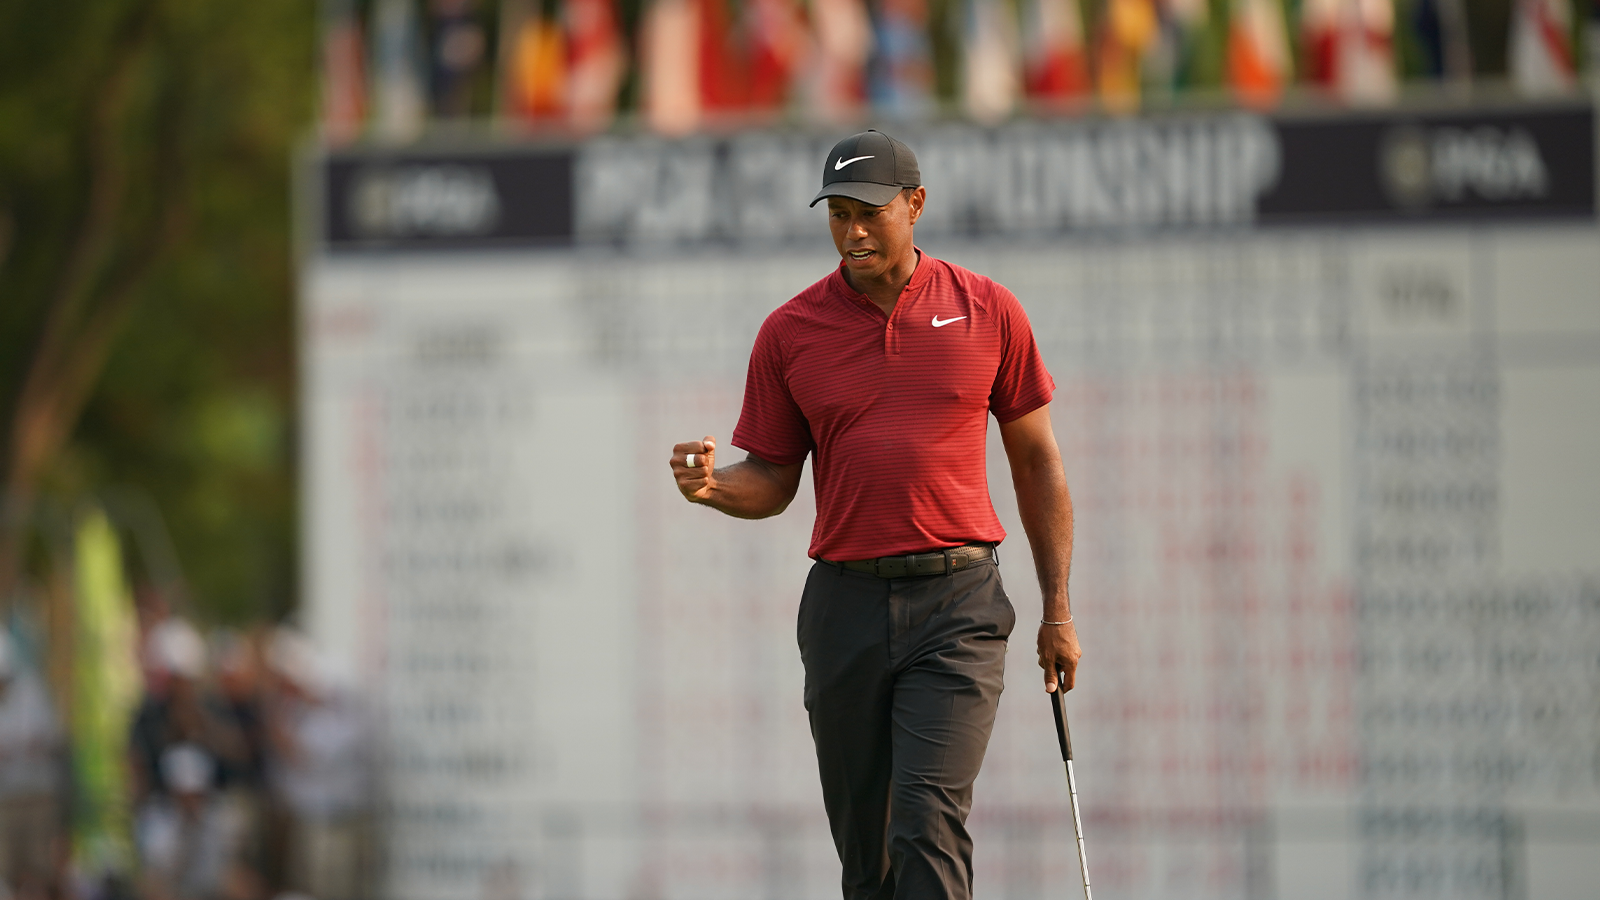  Tiger Woods reacts to making his putt for birdie on the 18th hole during the final round of the 100th PGA Championship held at Bellerive Golf Club on August 12, 2018 in St. Louis, Missouri. (Photo by Montana Pritchard/PGA of America)